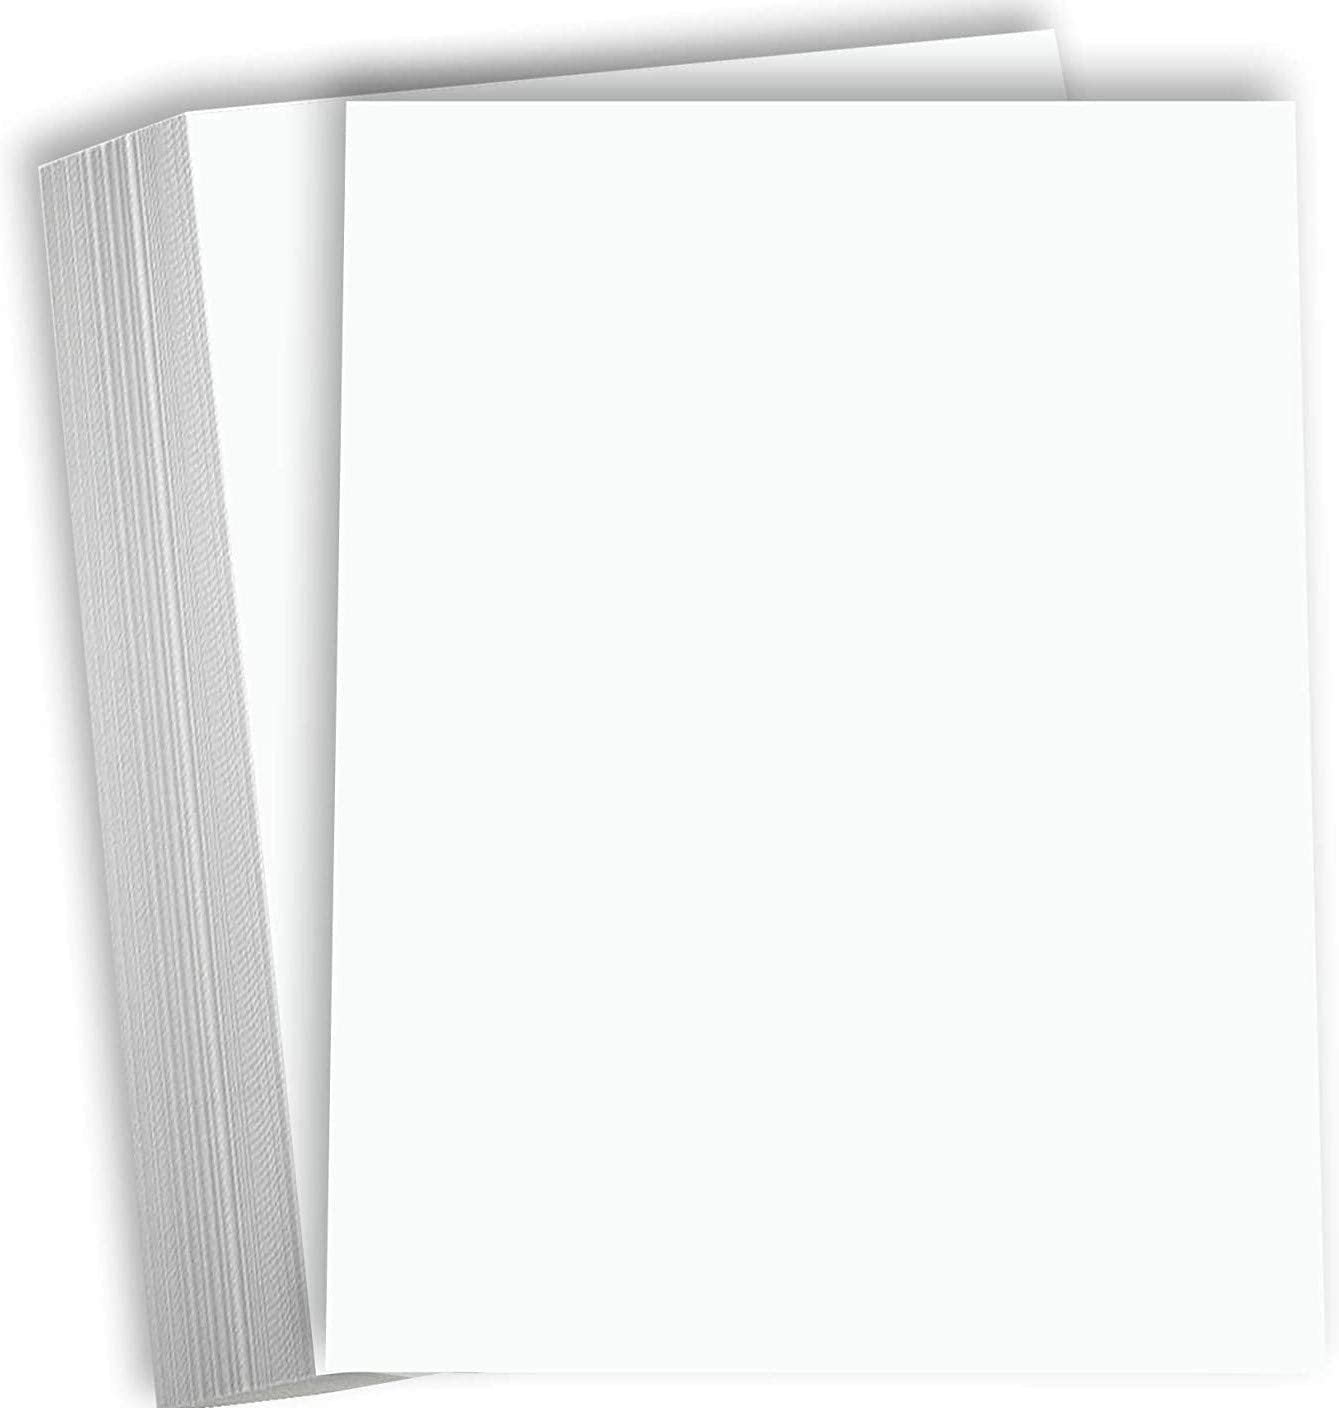 #100 lb Premium White Legal Size Cut Card Stock - Heavyweight 8.5 x 14 inches Pack of 200 Sheets 270 gsm Opaque Cover 